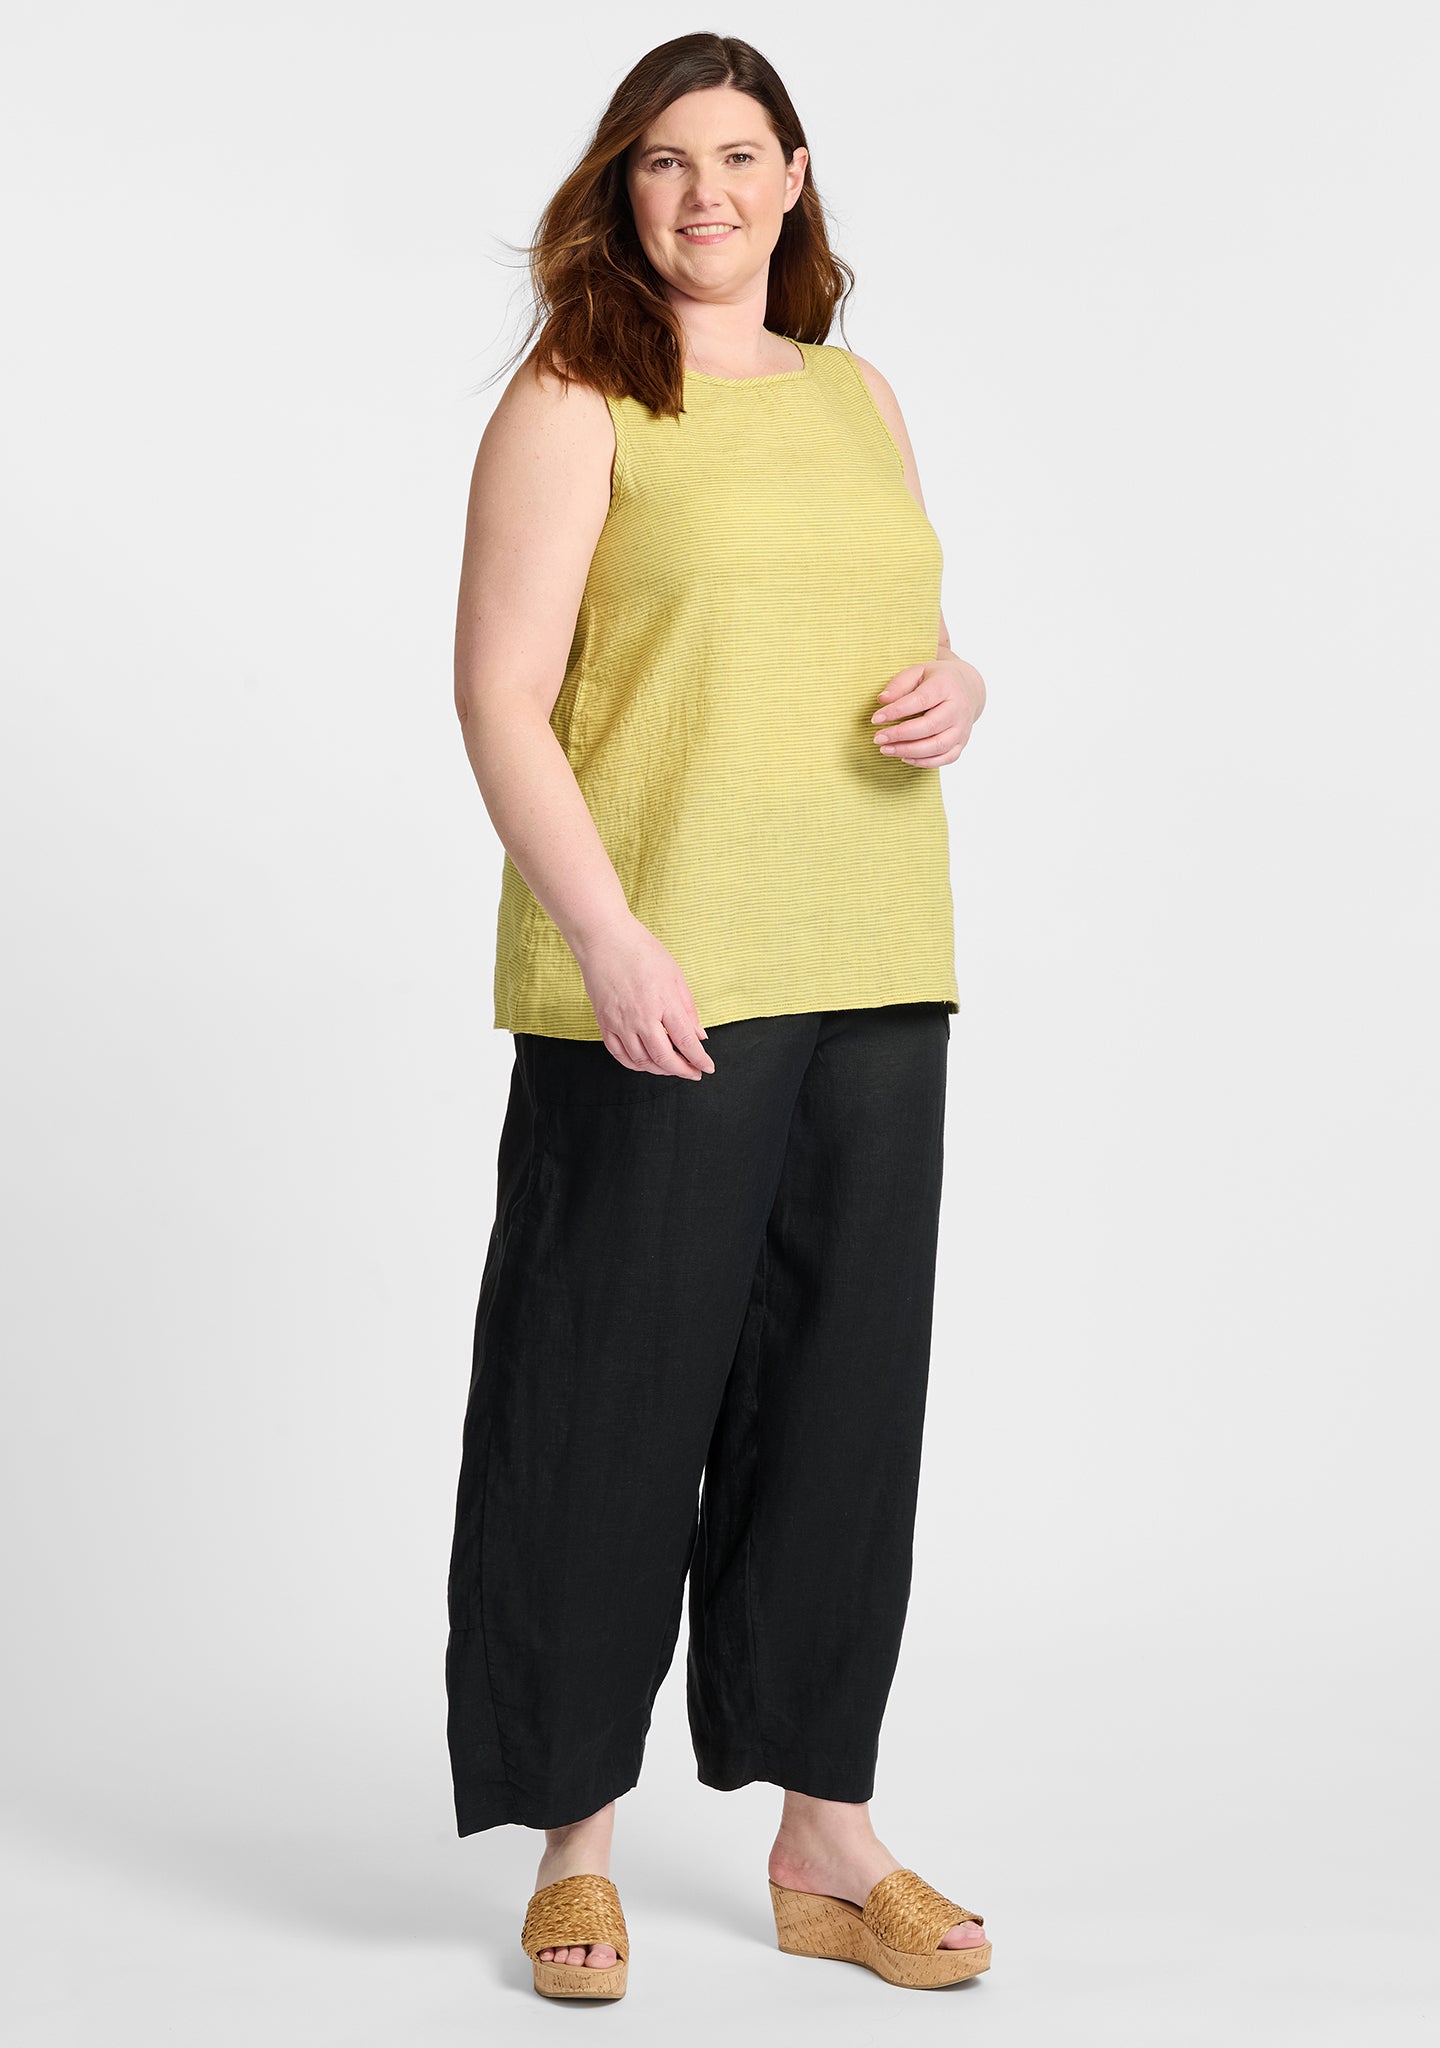 FLAX linen tank in yellow with linen pants in black